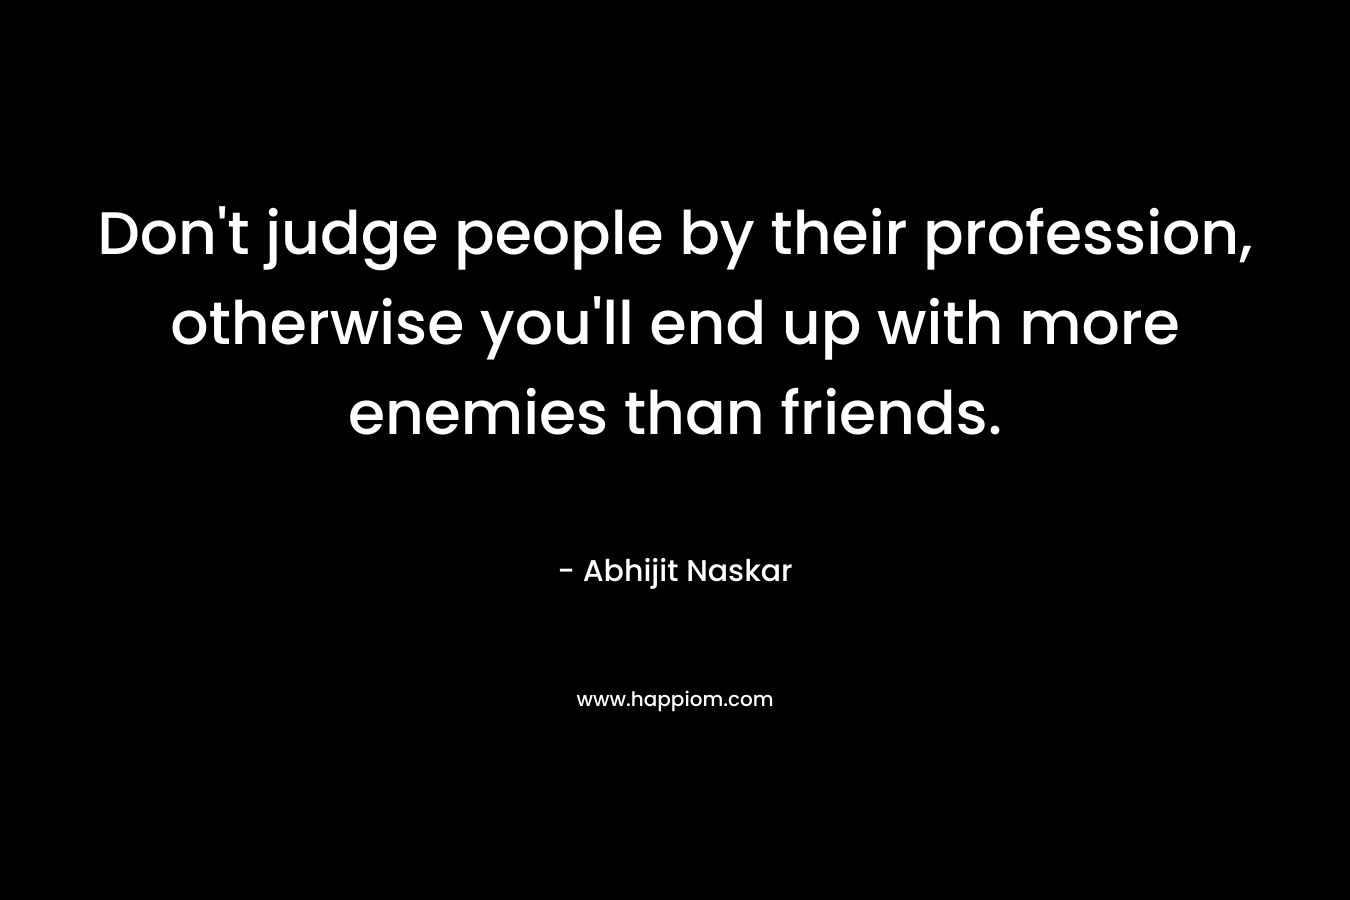 Don't judge people by their profession, otherwise you'll end up with more enemies than friends.